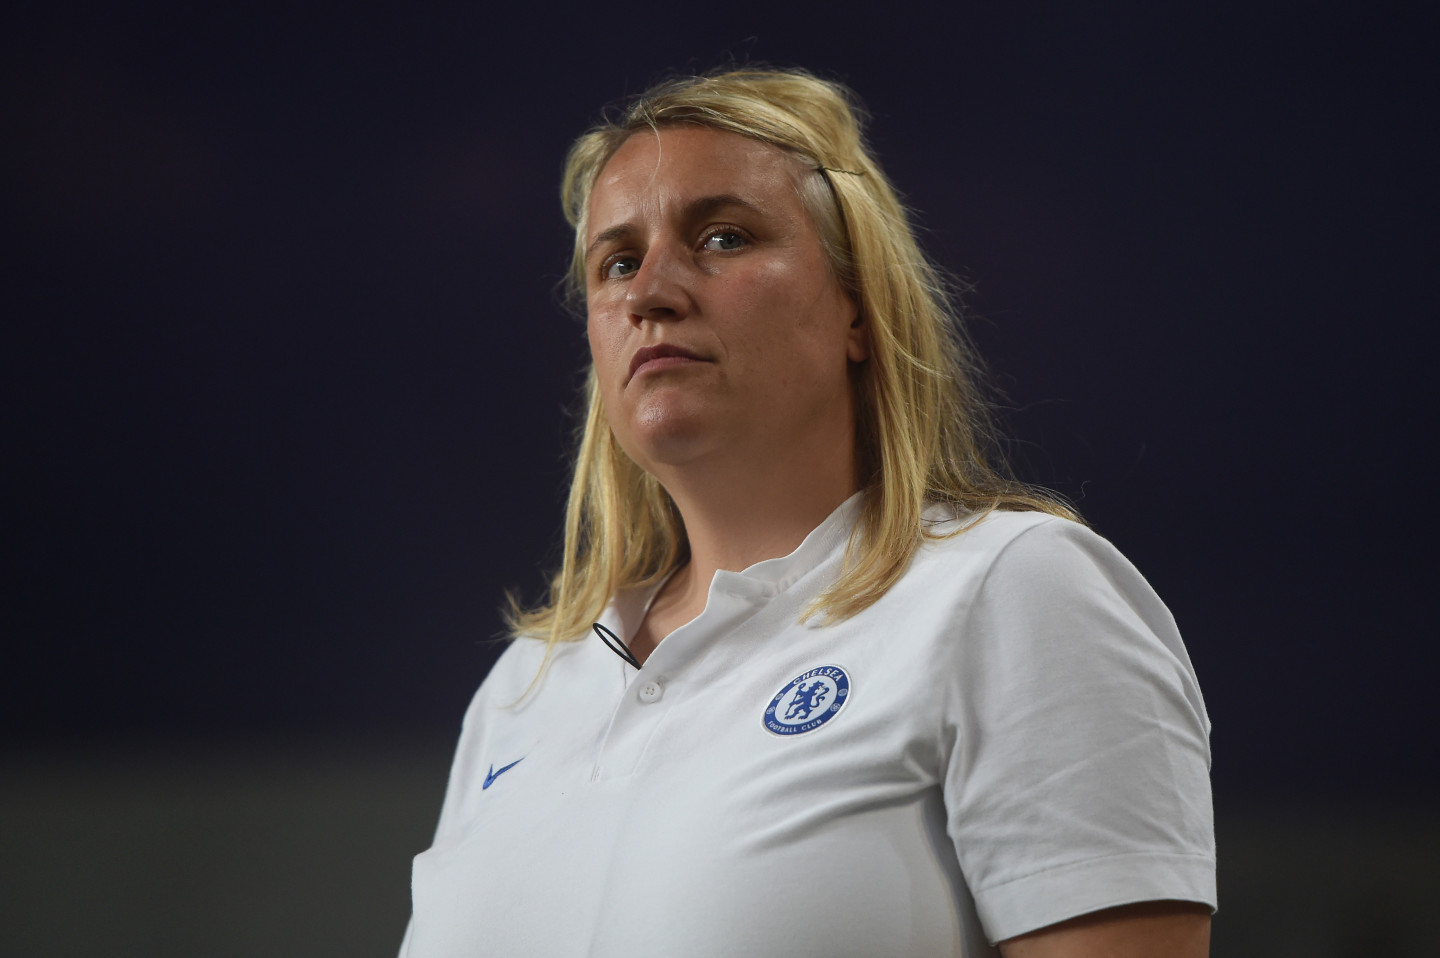 Emma Hayes charts the rise of women's football in England and